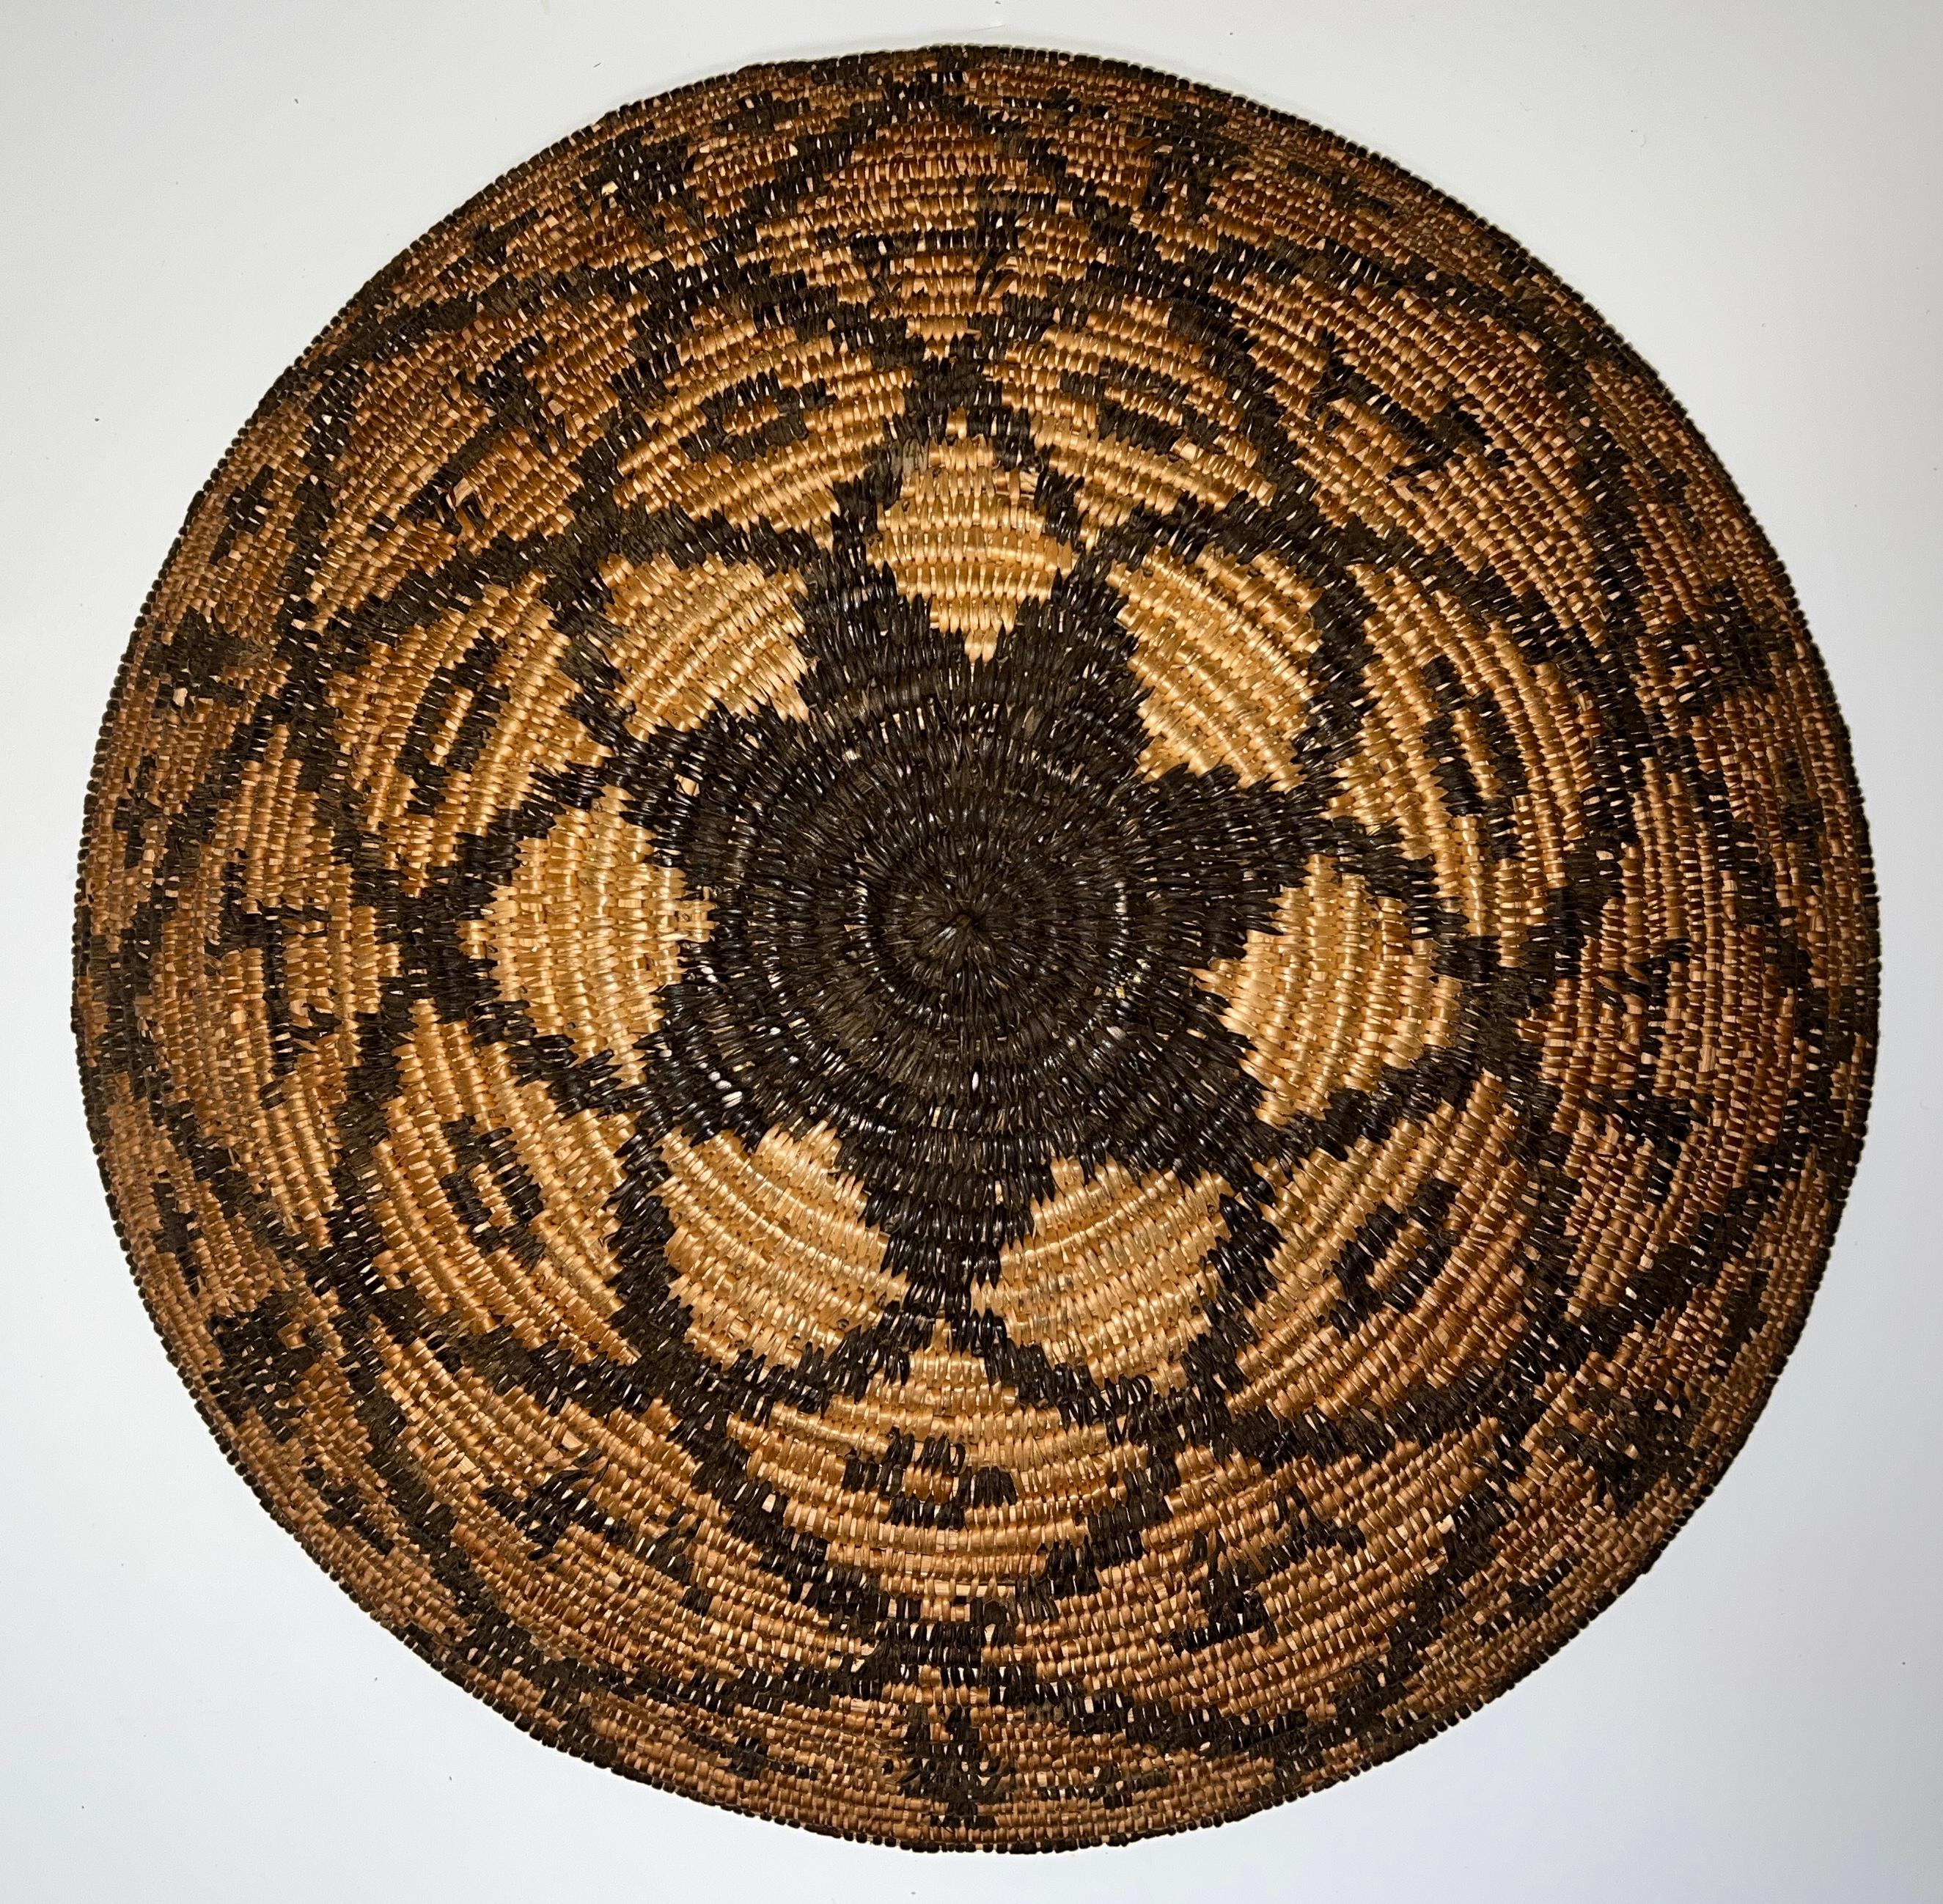 Woven Apache Basket with Dog and Human Motif - Other Art Style Art by Unknown